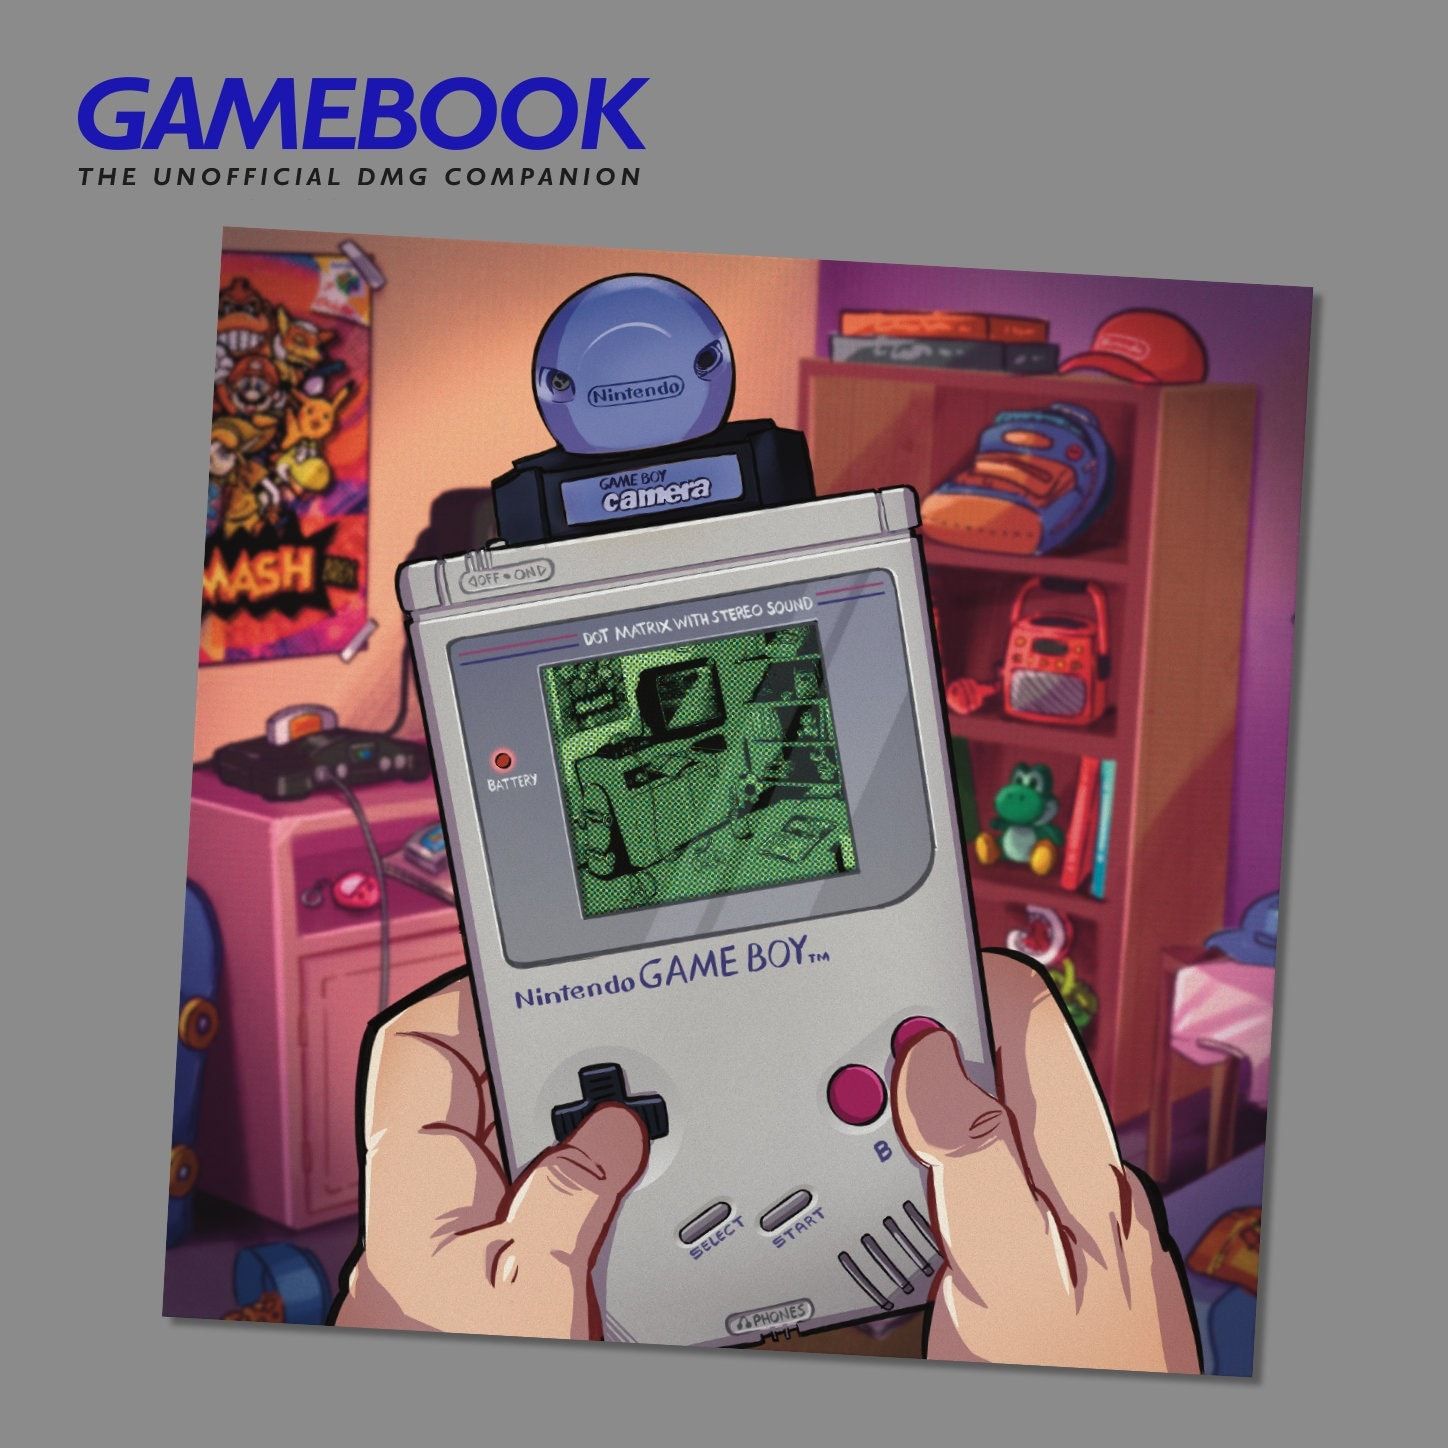 The cover of the book Gamebook. A person is holding a Nintendo Game Boy, and there is a camera on top of it. - Game Boy